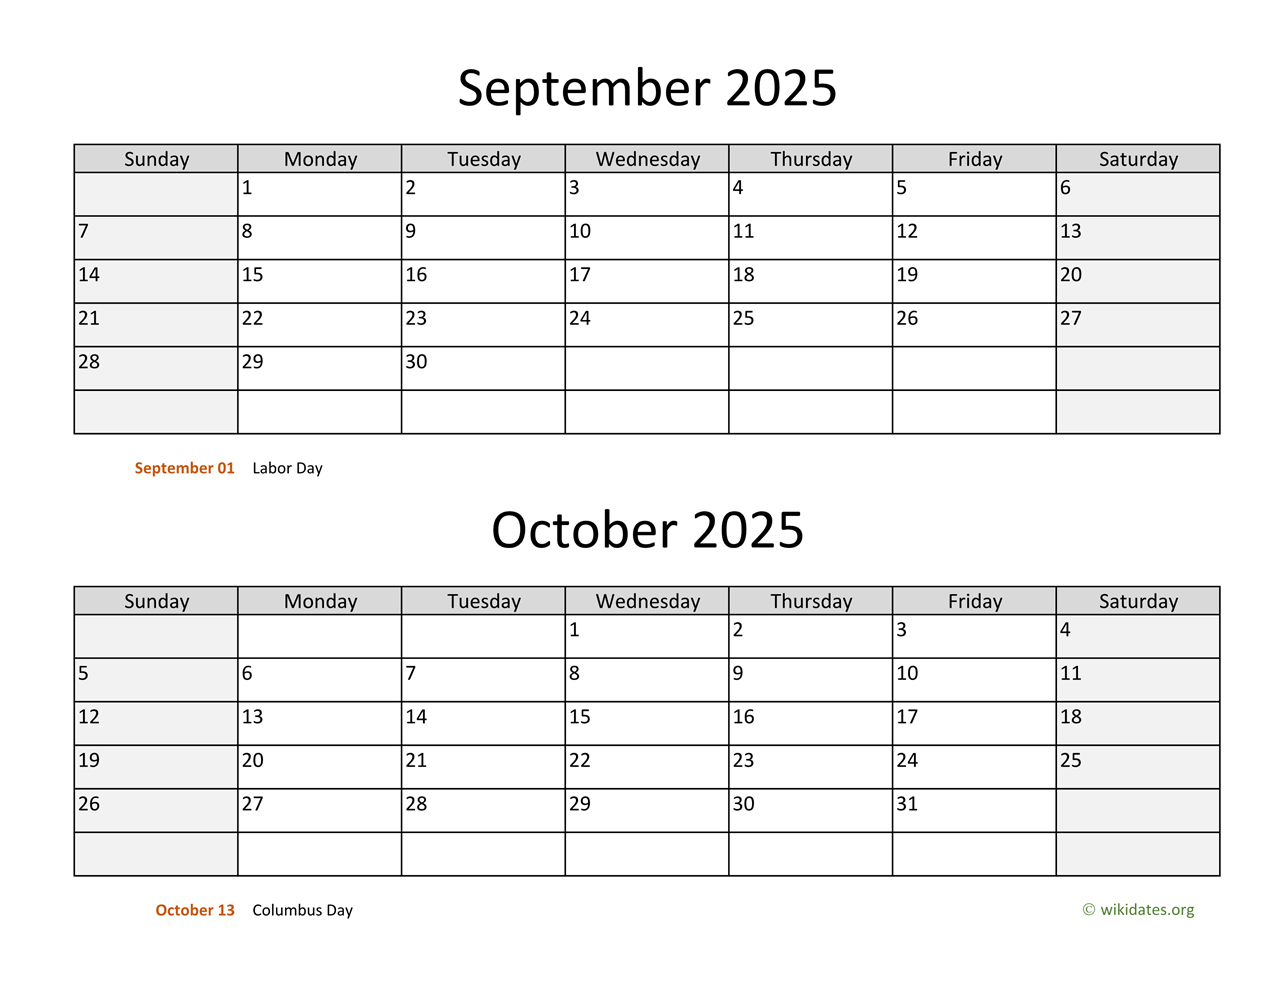 september-2025-calendar-with-notes-wikidates